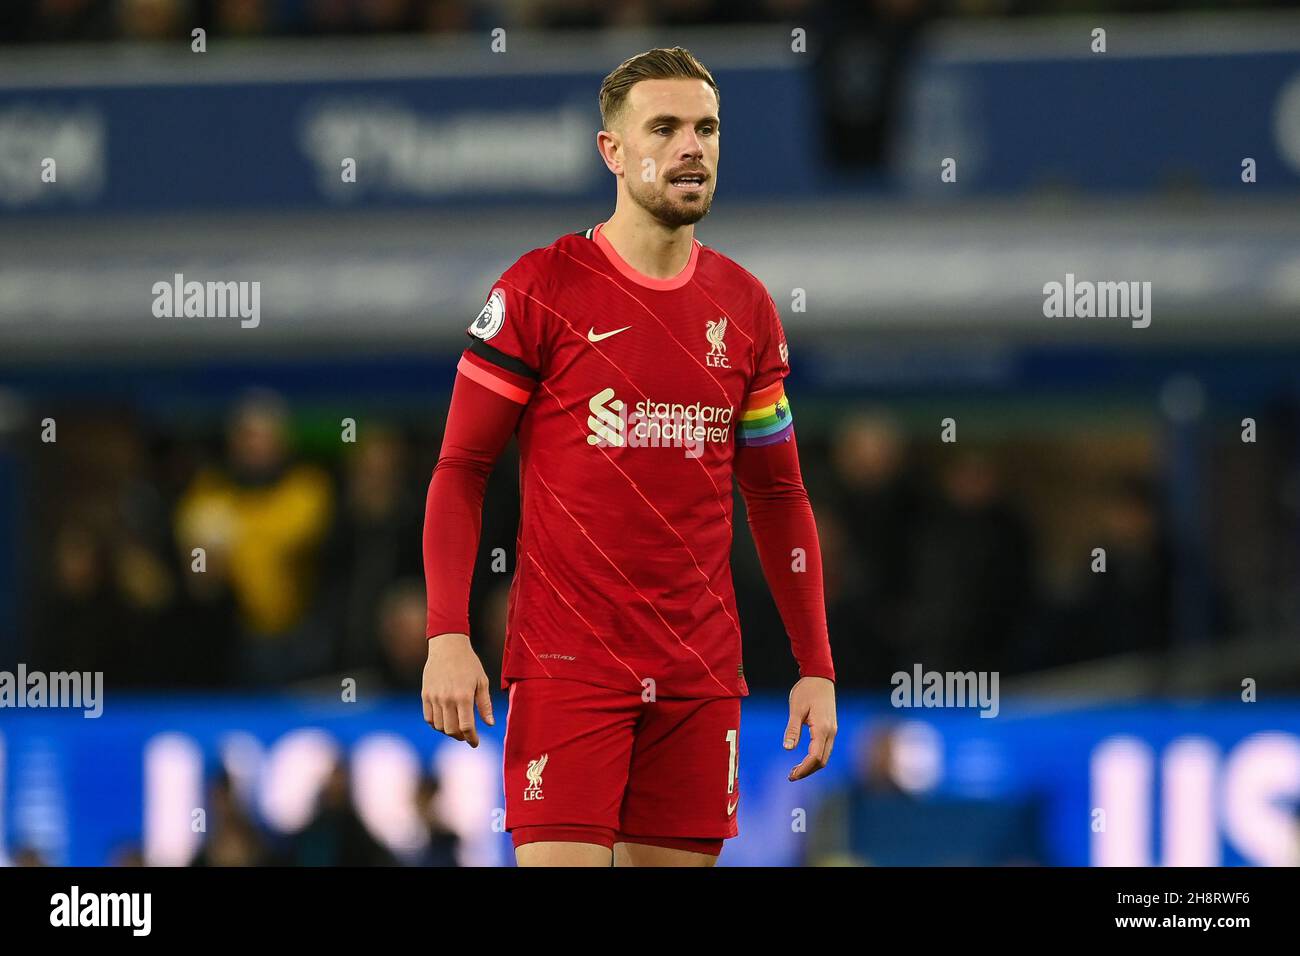 Jordan Henderson #14 of Liverpool in action during the game in, on 12/1/2021. (Photo by Craig Thomas/News Images/Sipa USA) Credit: Sipa USA/Alamy Live News Stock Photo